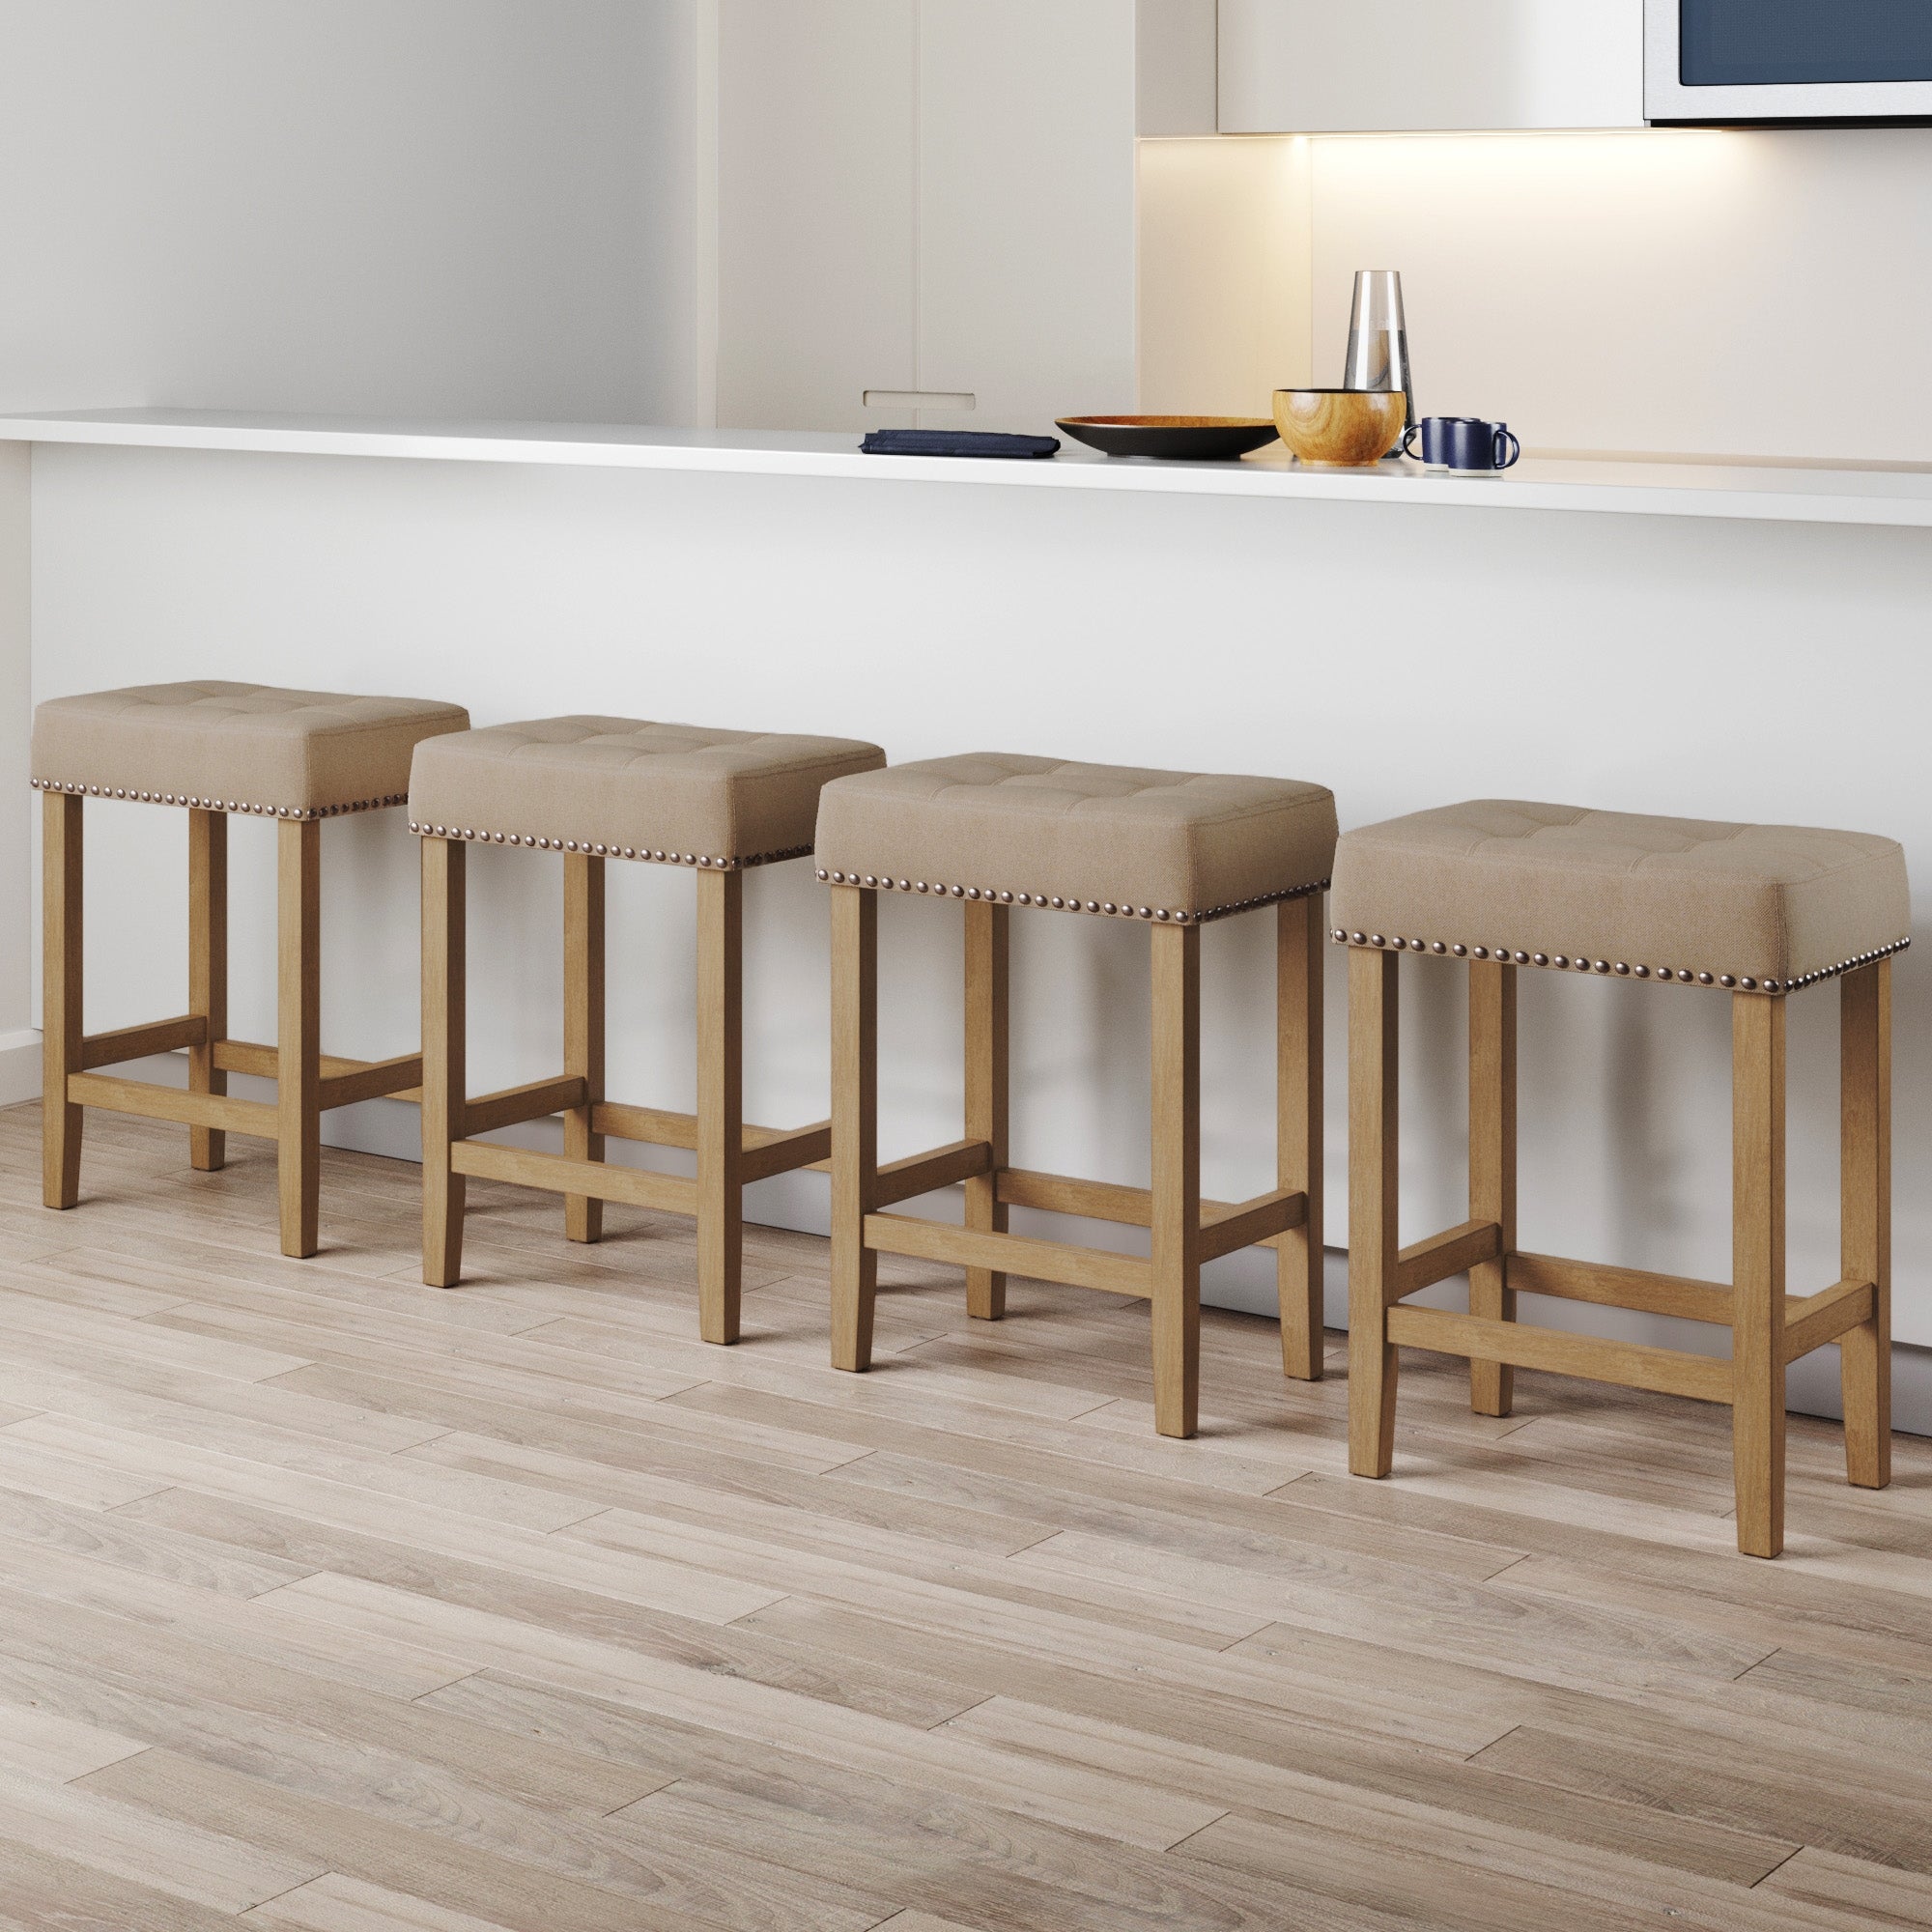 Set of 4 Tufted Wood Bar Stools Brown Flax